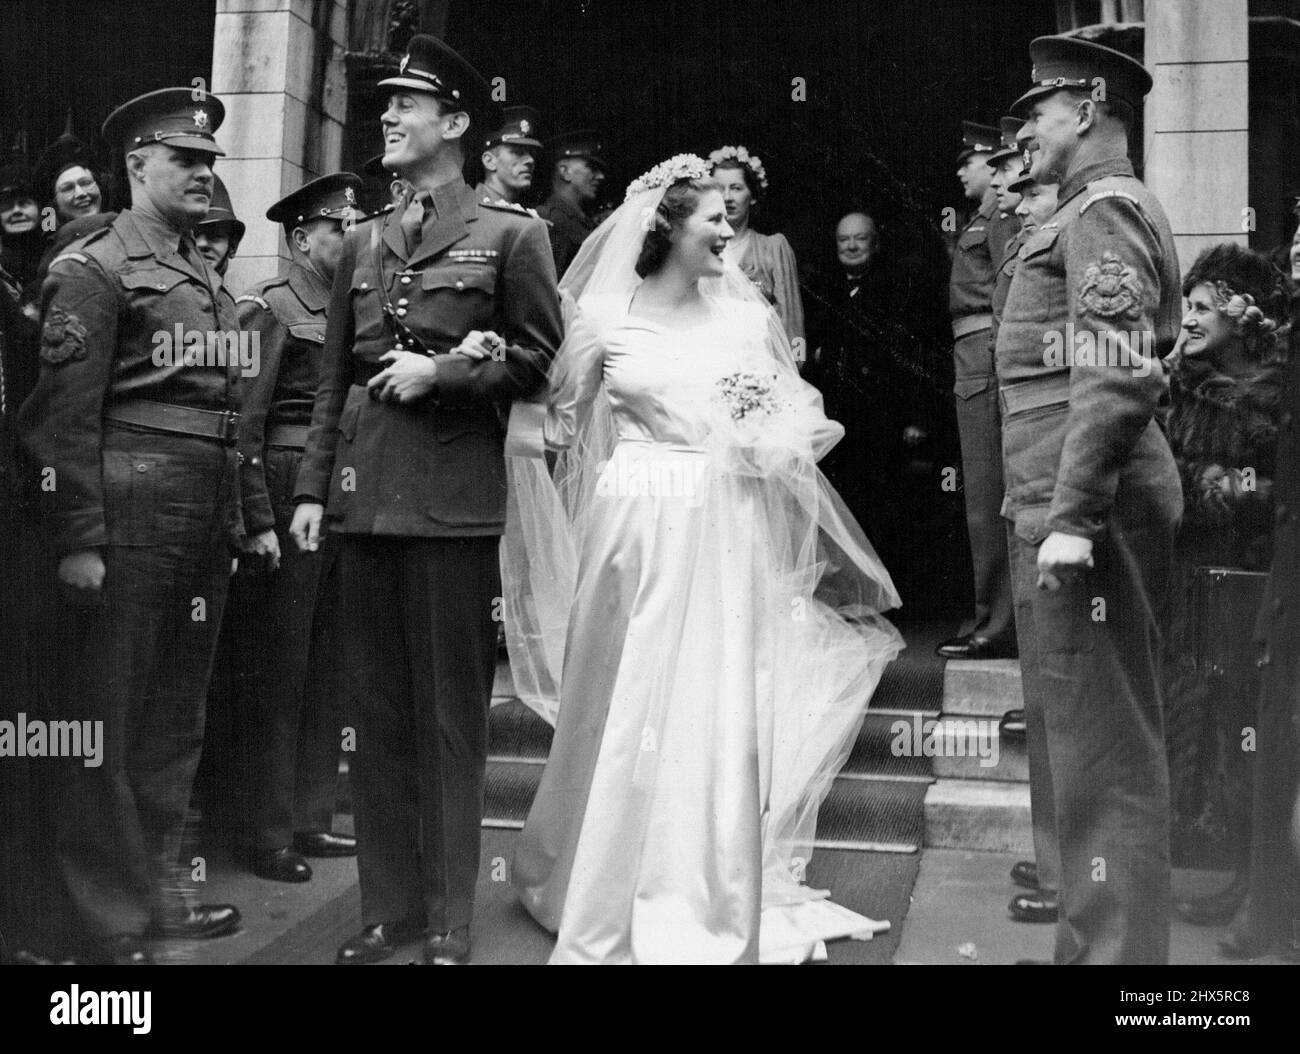 Mary Churchill Weds -- The Bridal couple leaving St. Margaret's Westminster after their wedding this afternoon February 11. Mary Churchill's dress was in white slipper satin with heart-shaped neckline, turn-back cuffs on three-quarter loose sleeves and very full skirt. Bridal Couple Miss Mary Churchill , youngest daughter of Mr. Winston Churchill, leader of the Opposition and Britian's war-time Prime Minister was married to Captain Christopher Soames of the Coldstream Guards, Assistant Military attache at the British Embassy in Paris, in St. Margaret's Westminster, today February 11. February Stock Photo